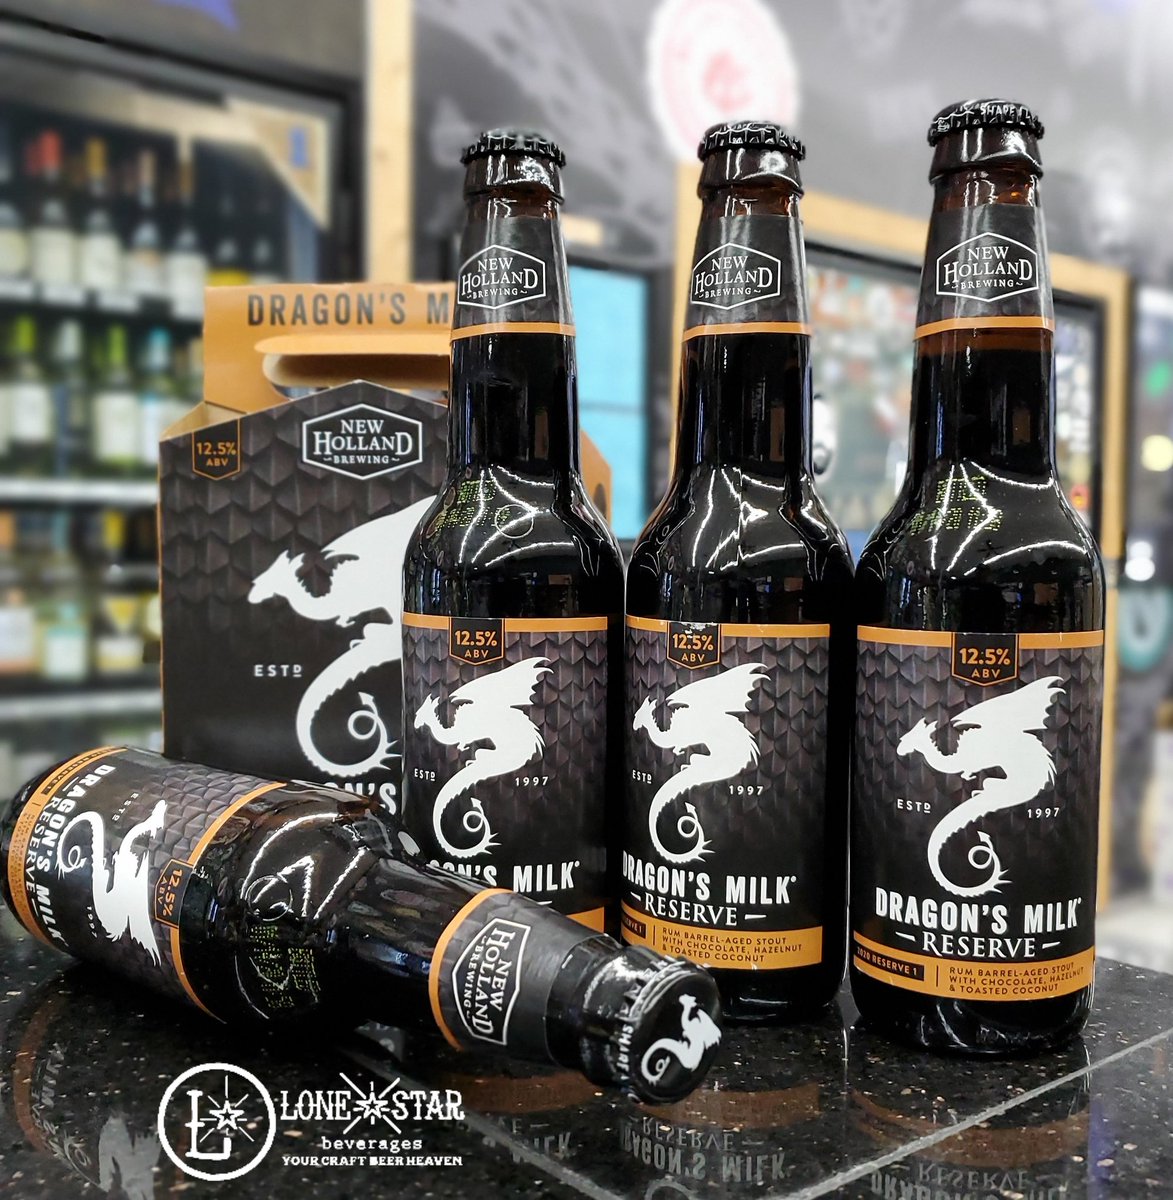 Lone Star Beverages New Holland Brewing Co Dragon S Milk Reserve Rum Barrel Aged Stout With Chocolate Hazelnut And Toasted Coconut 12 5 Abv Yourcraftbeerheaven Dfw Craftbeer Newhollandbrewing Dragonsmilkreserve